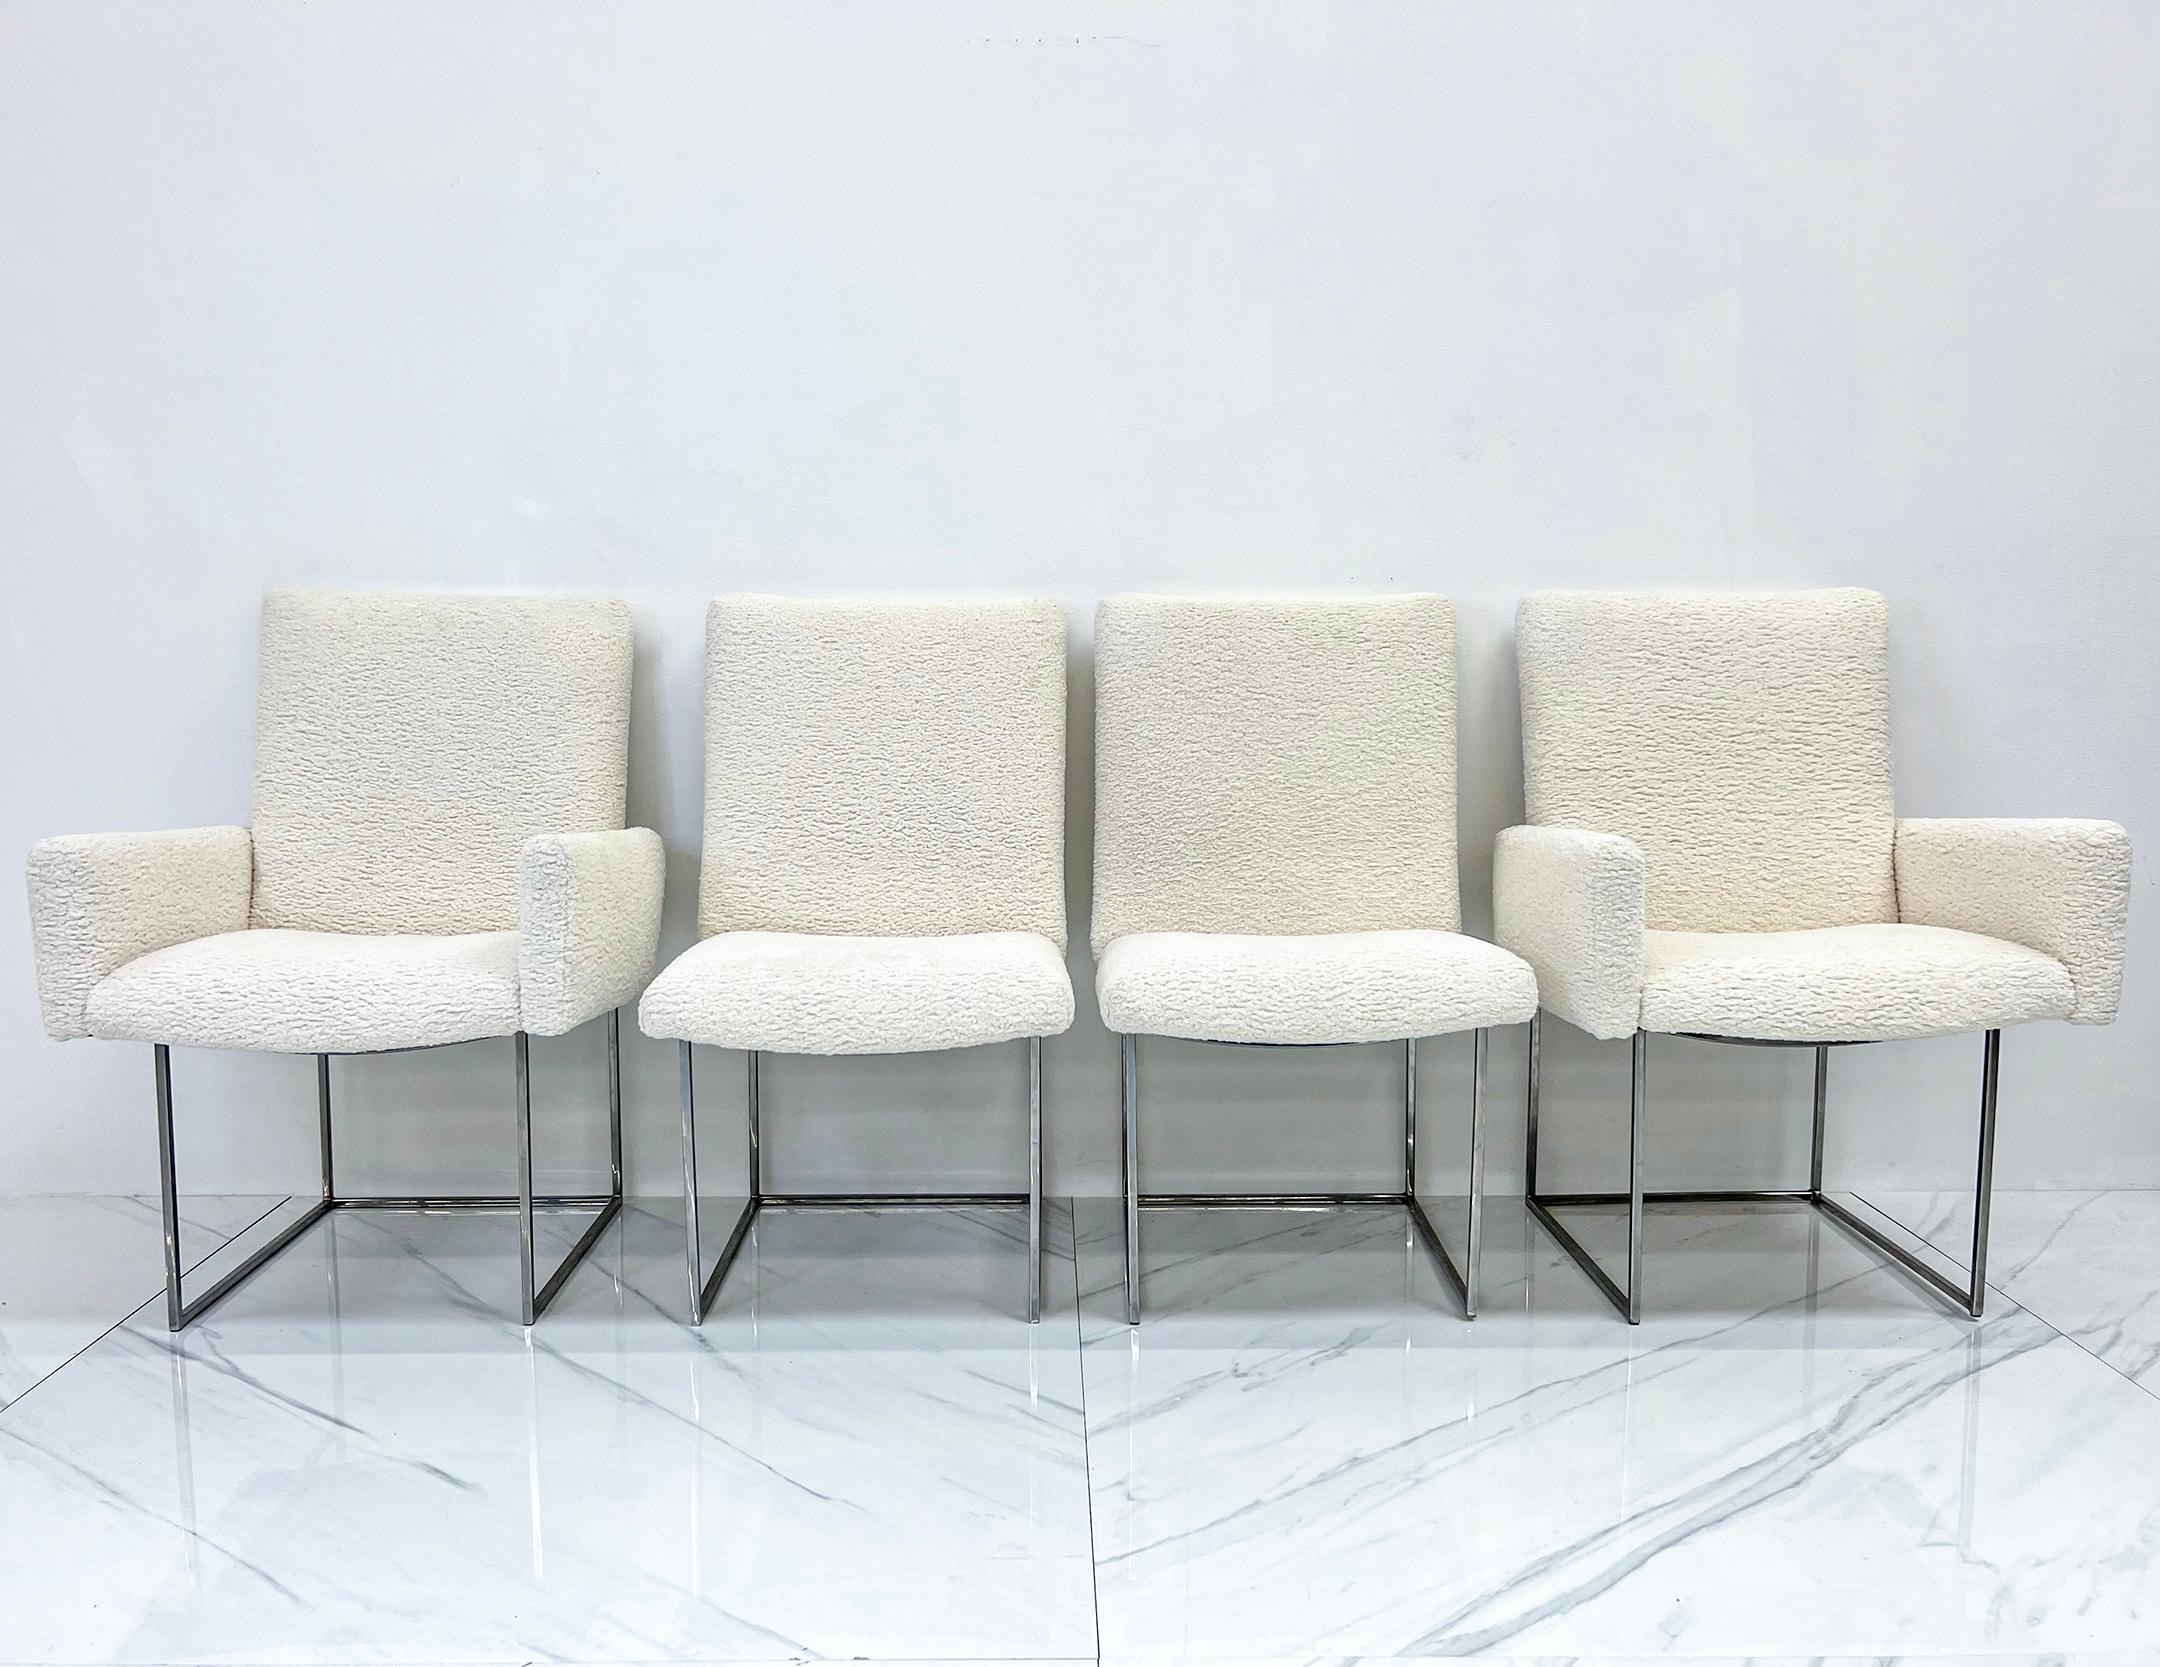 These chairs are stunning! Originally introduced in the 1950s, Milo Baughman's Thin Line dining chairs are a Classic Mid-Century Modern design that is highly regarded for its sleek and Minimalist aesthetic. These chairs quickly became a popular